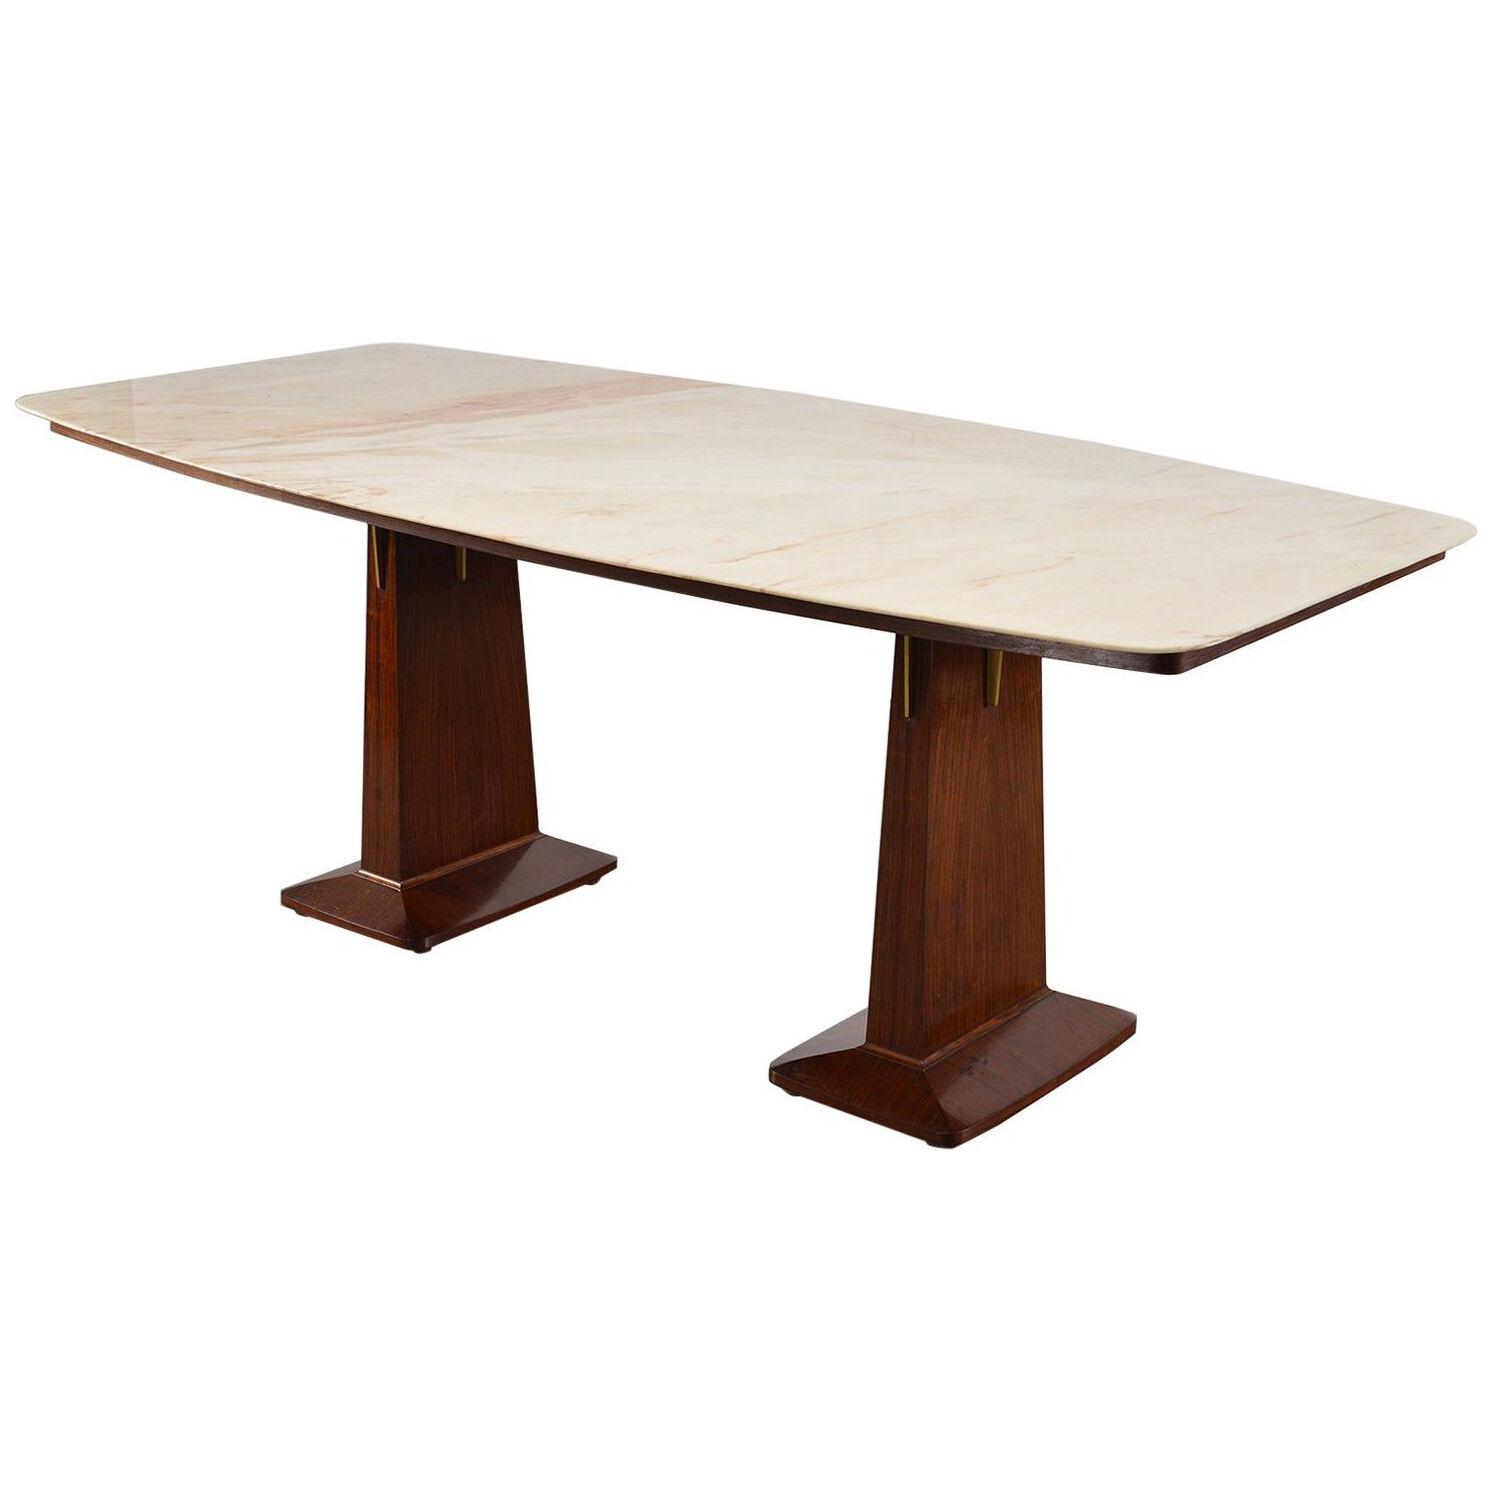 Italian Double Pedestal Table with Marble-Top in Style of Vittorio Dassi